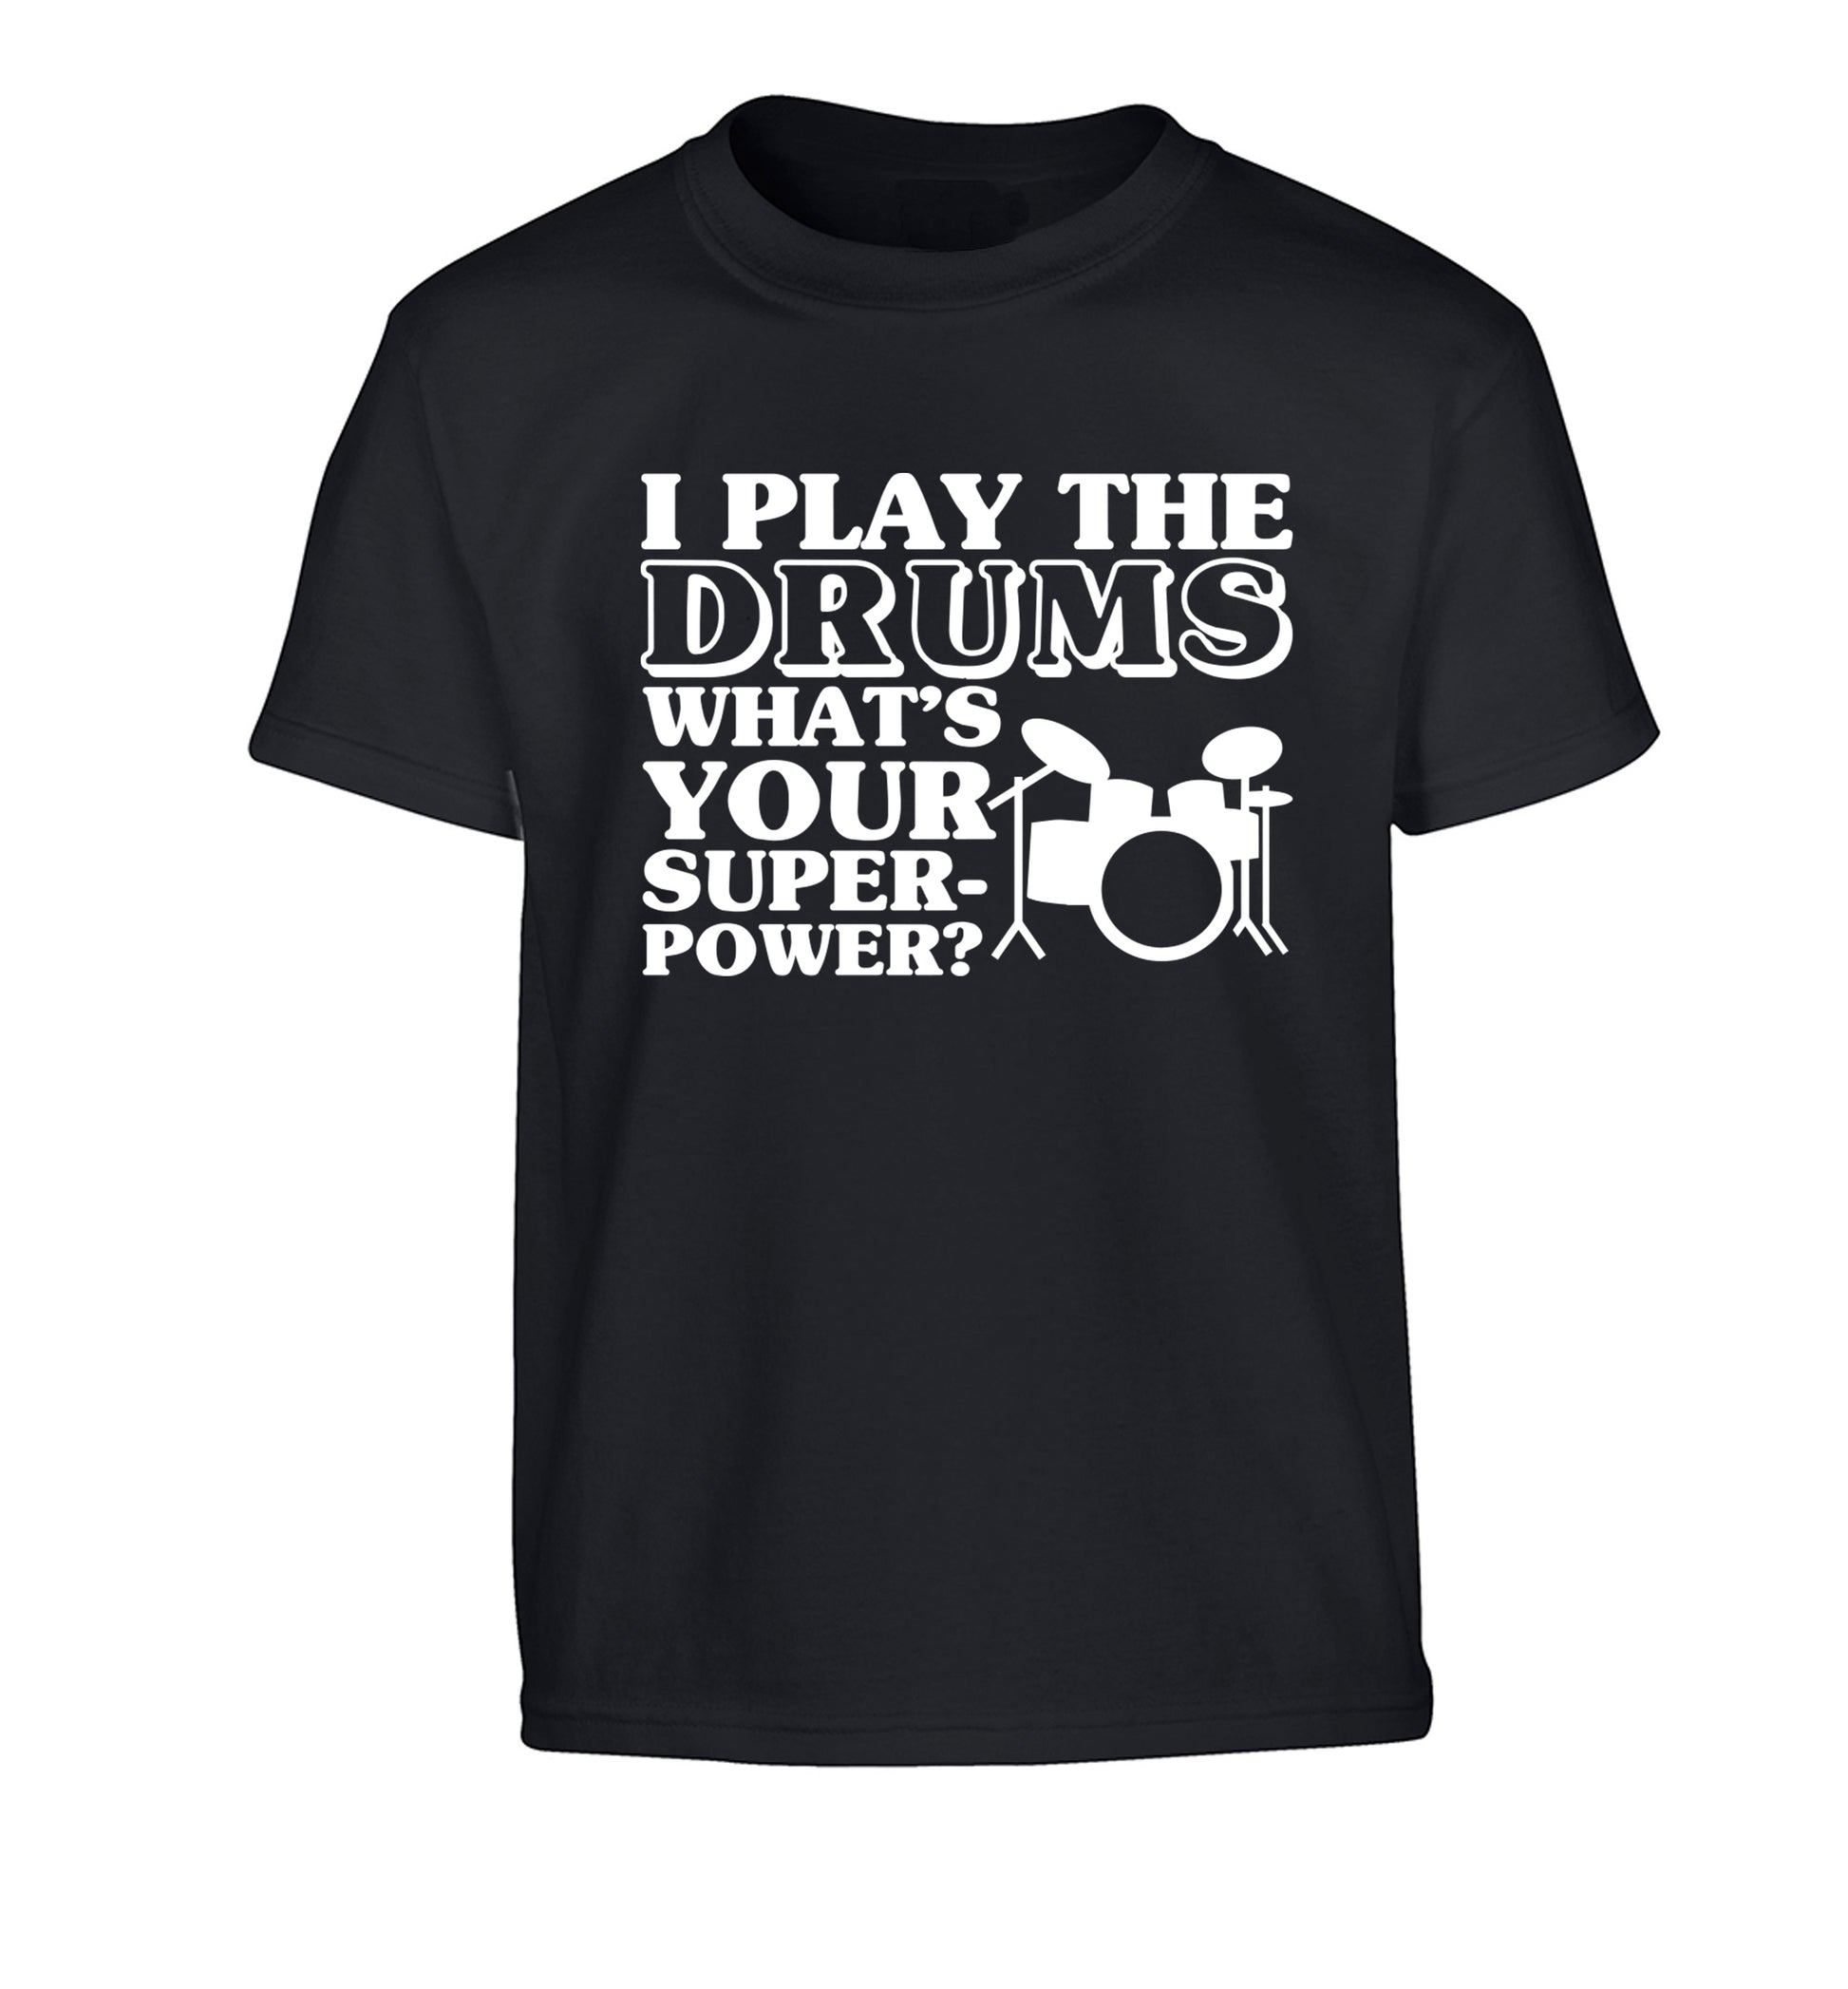 I play the drums what's your superpower? Children's black Tshirt 12-14 Years